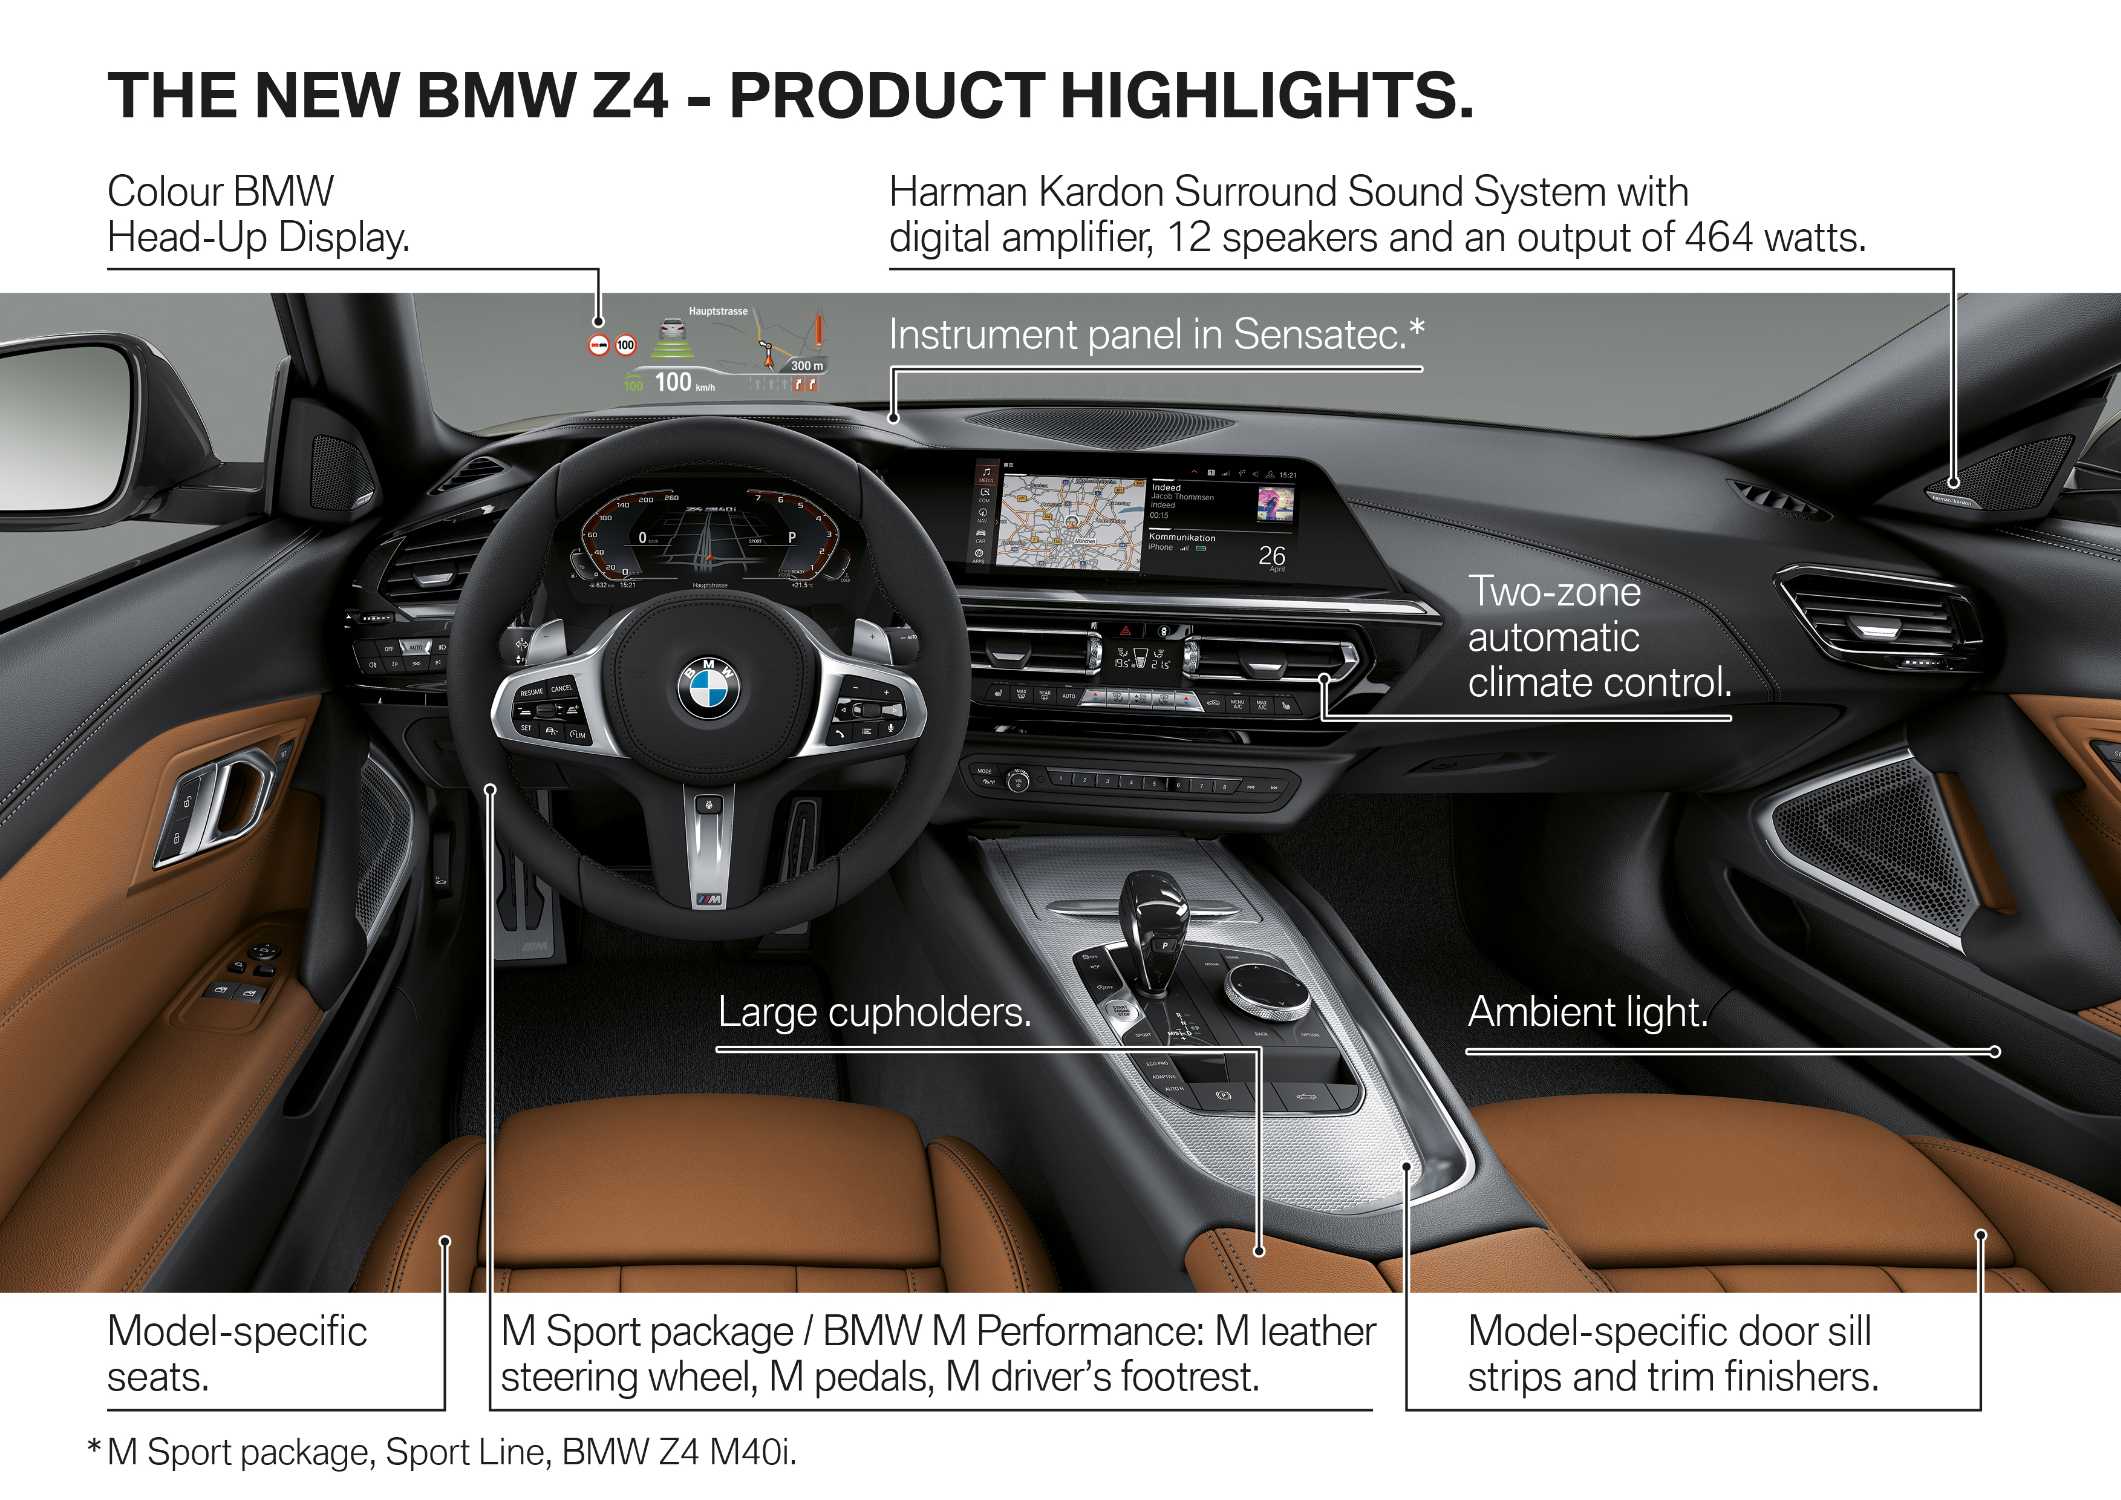 The new BMW Z4 - Product Highlights (09/2018).